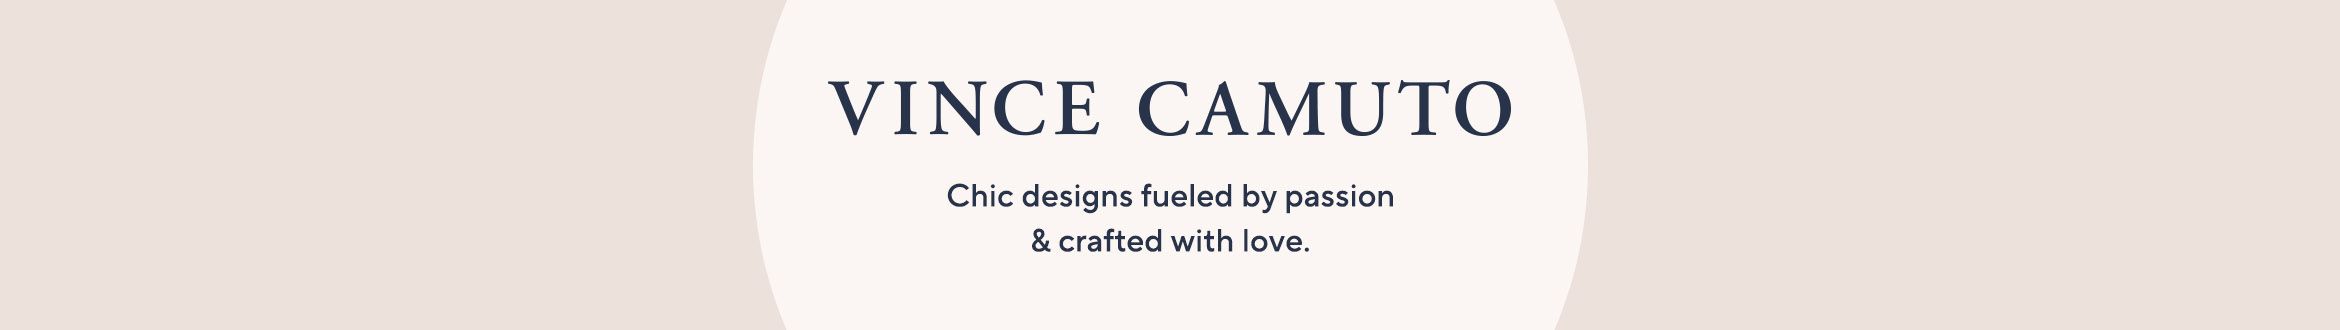 Vince Camuto.  Chic designs fueled by passion & crafted with love